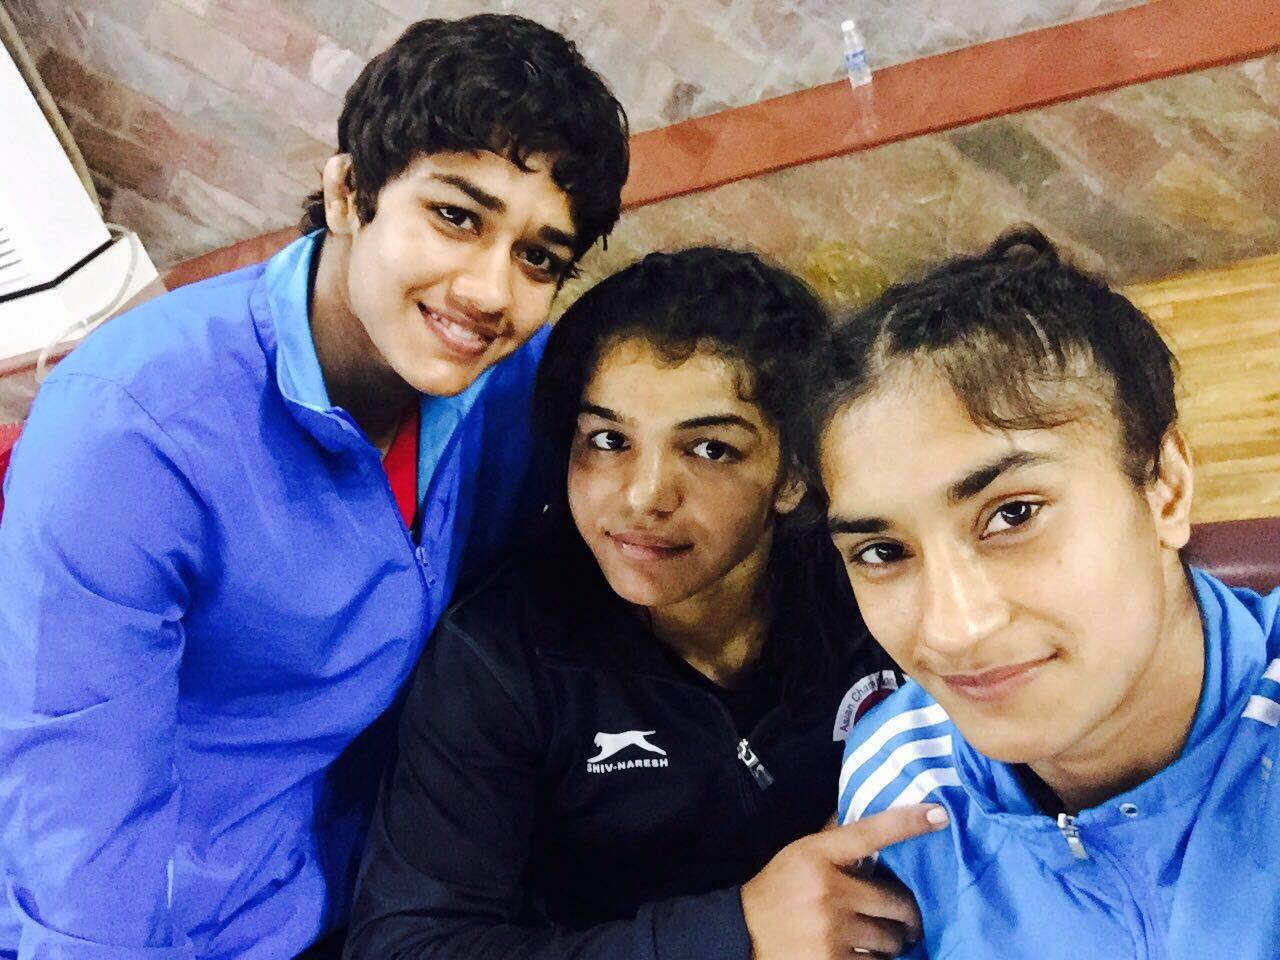 Vinesh Phogat wins gold to qualify for Rio